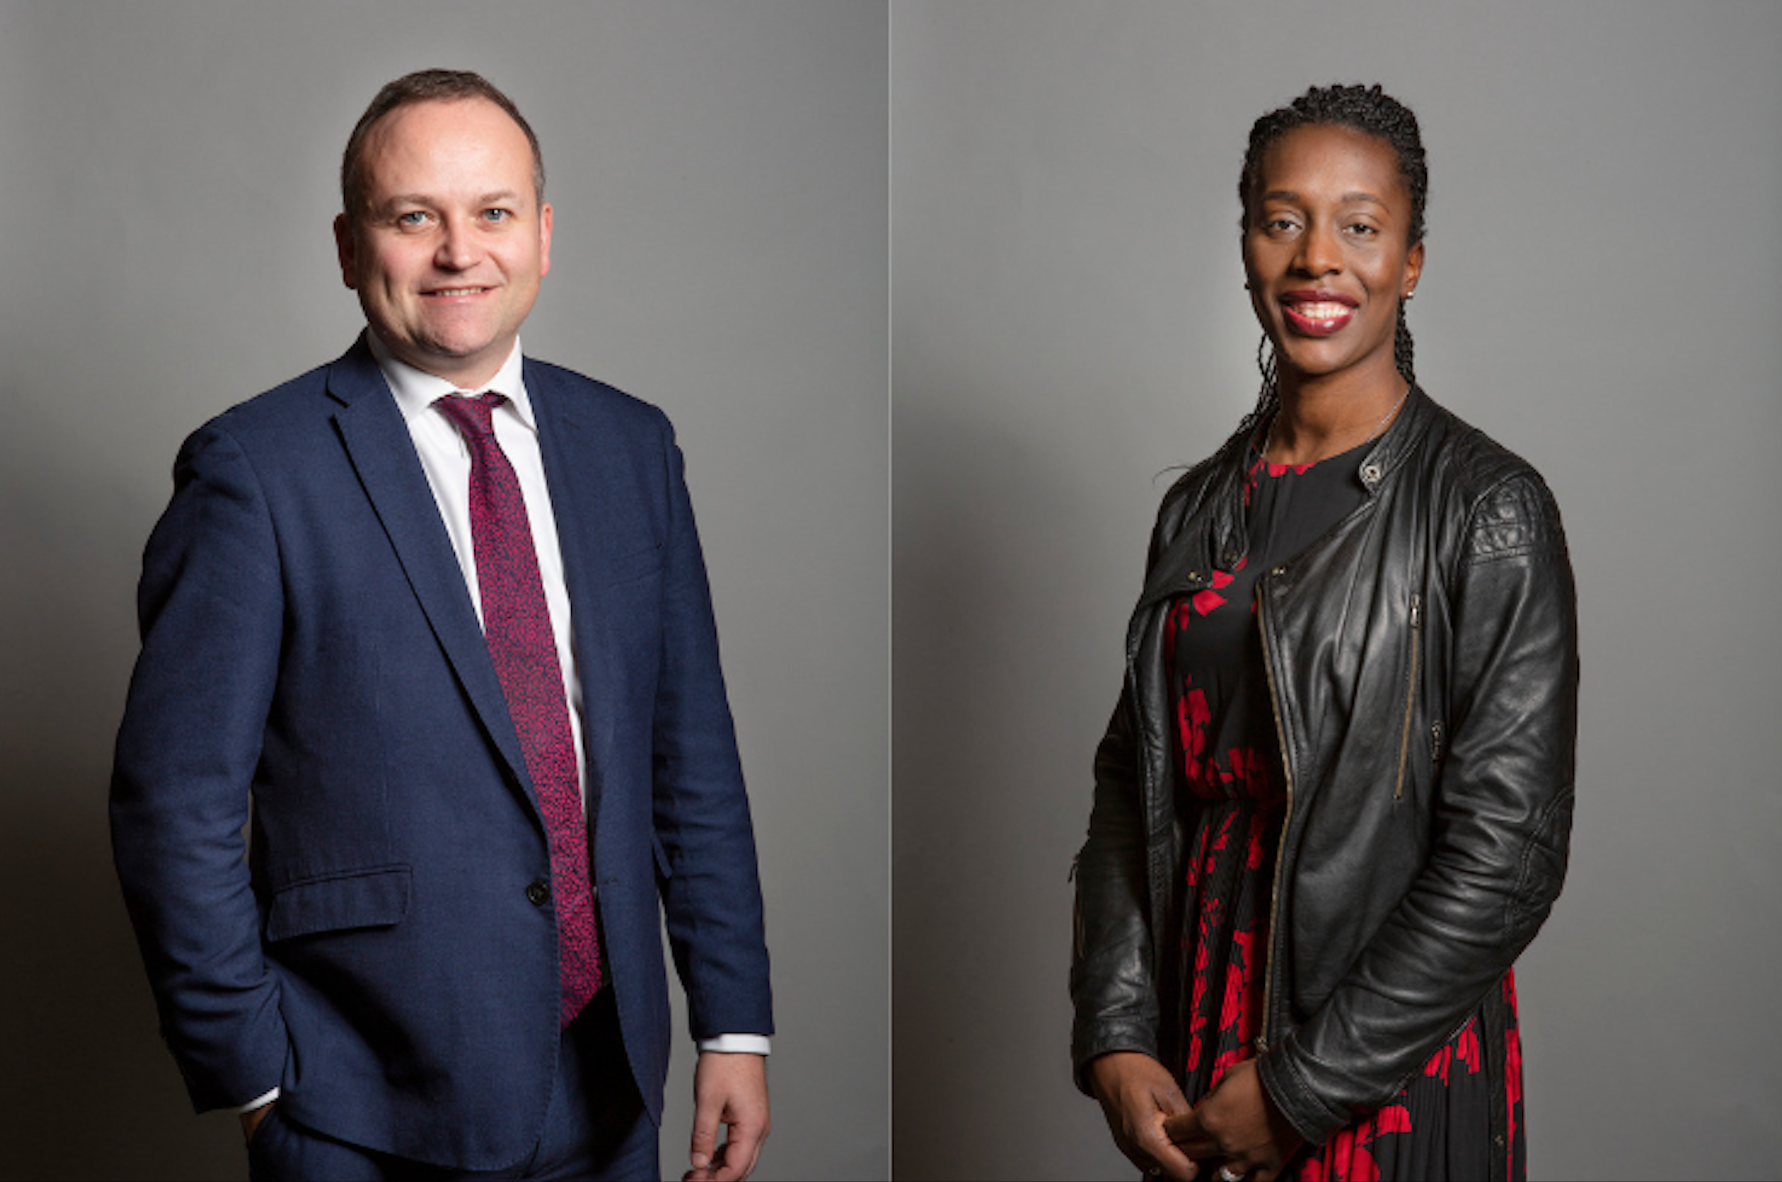 Images of Neil Coyle MP and Florence Eshalomi MP